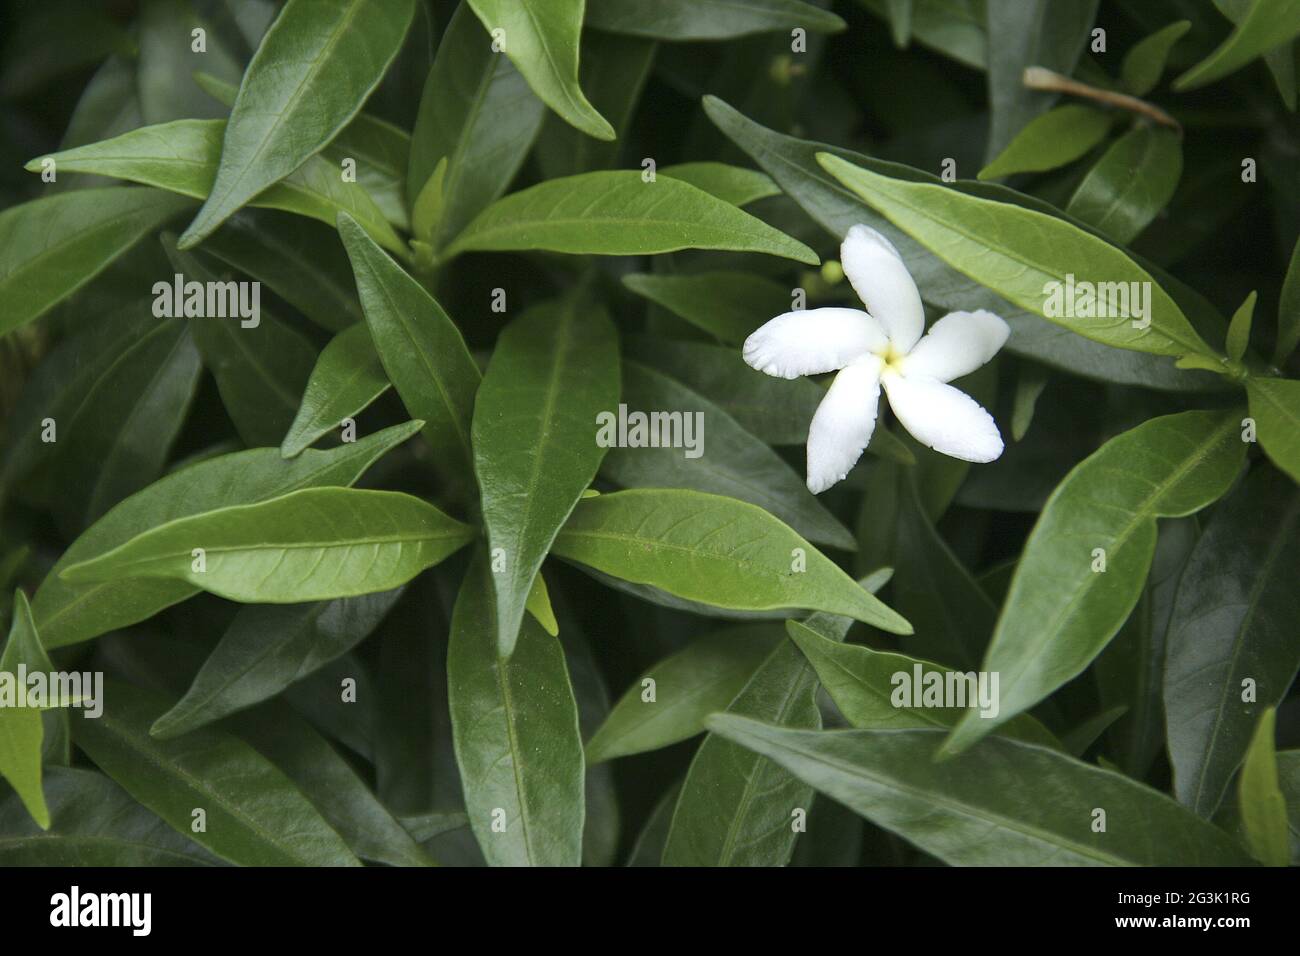 Loner in a Foliage Stock Photo